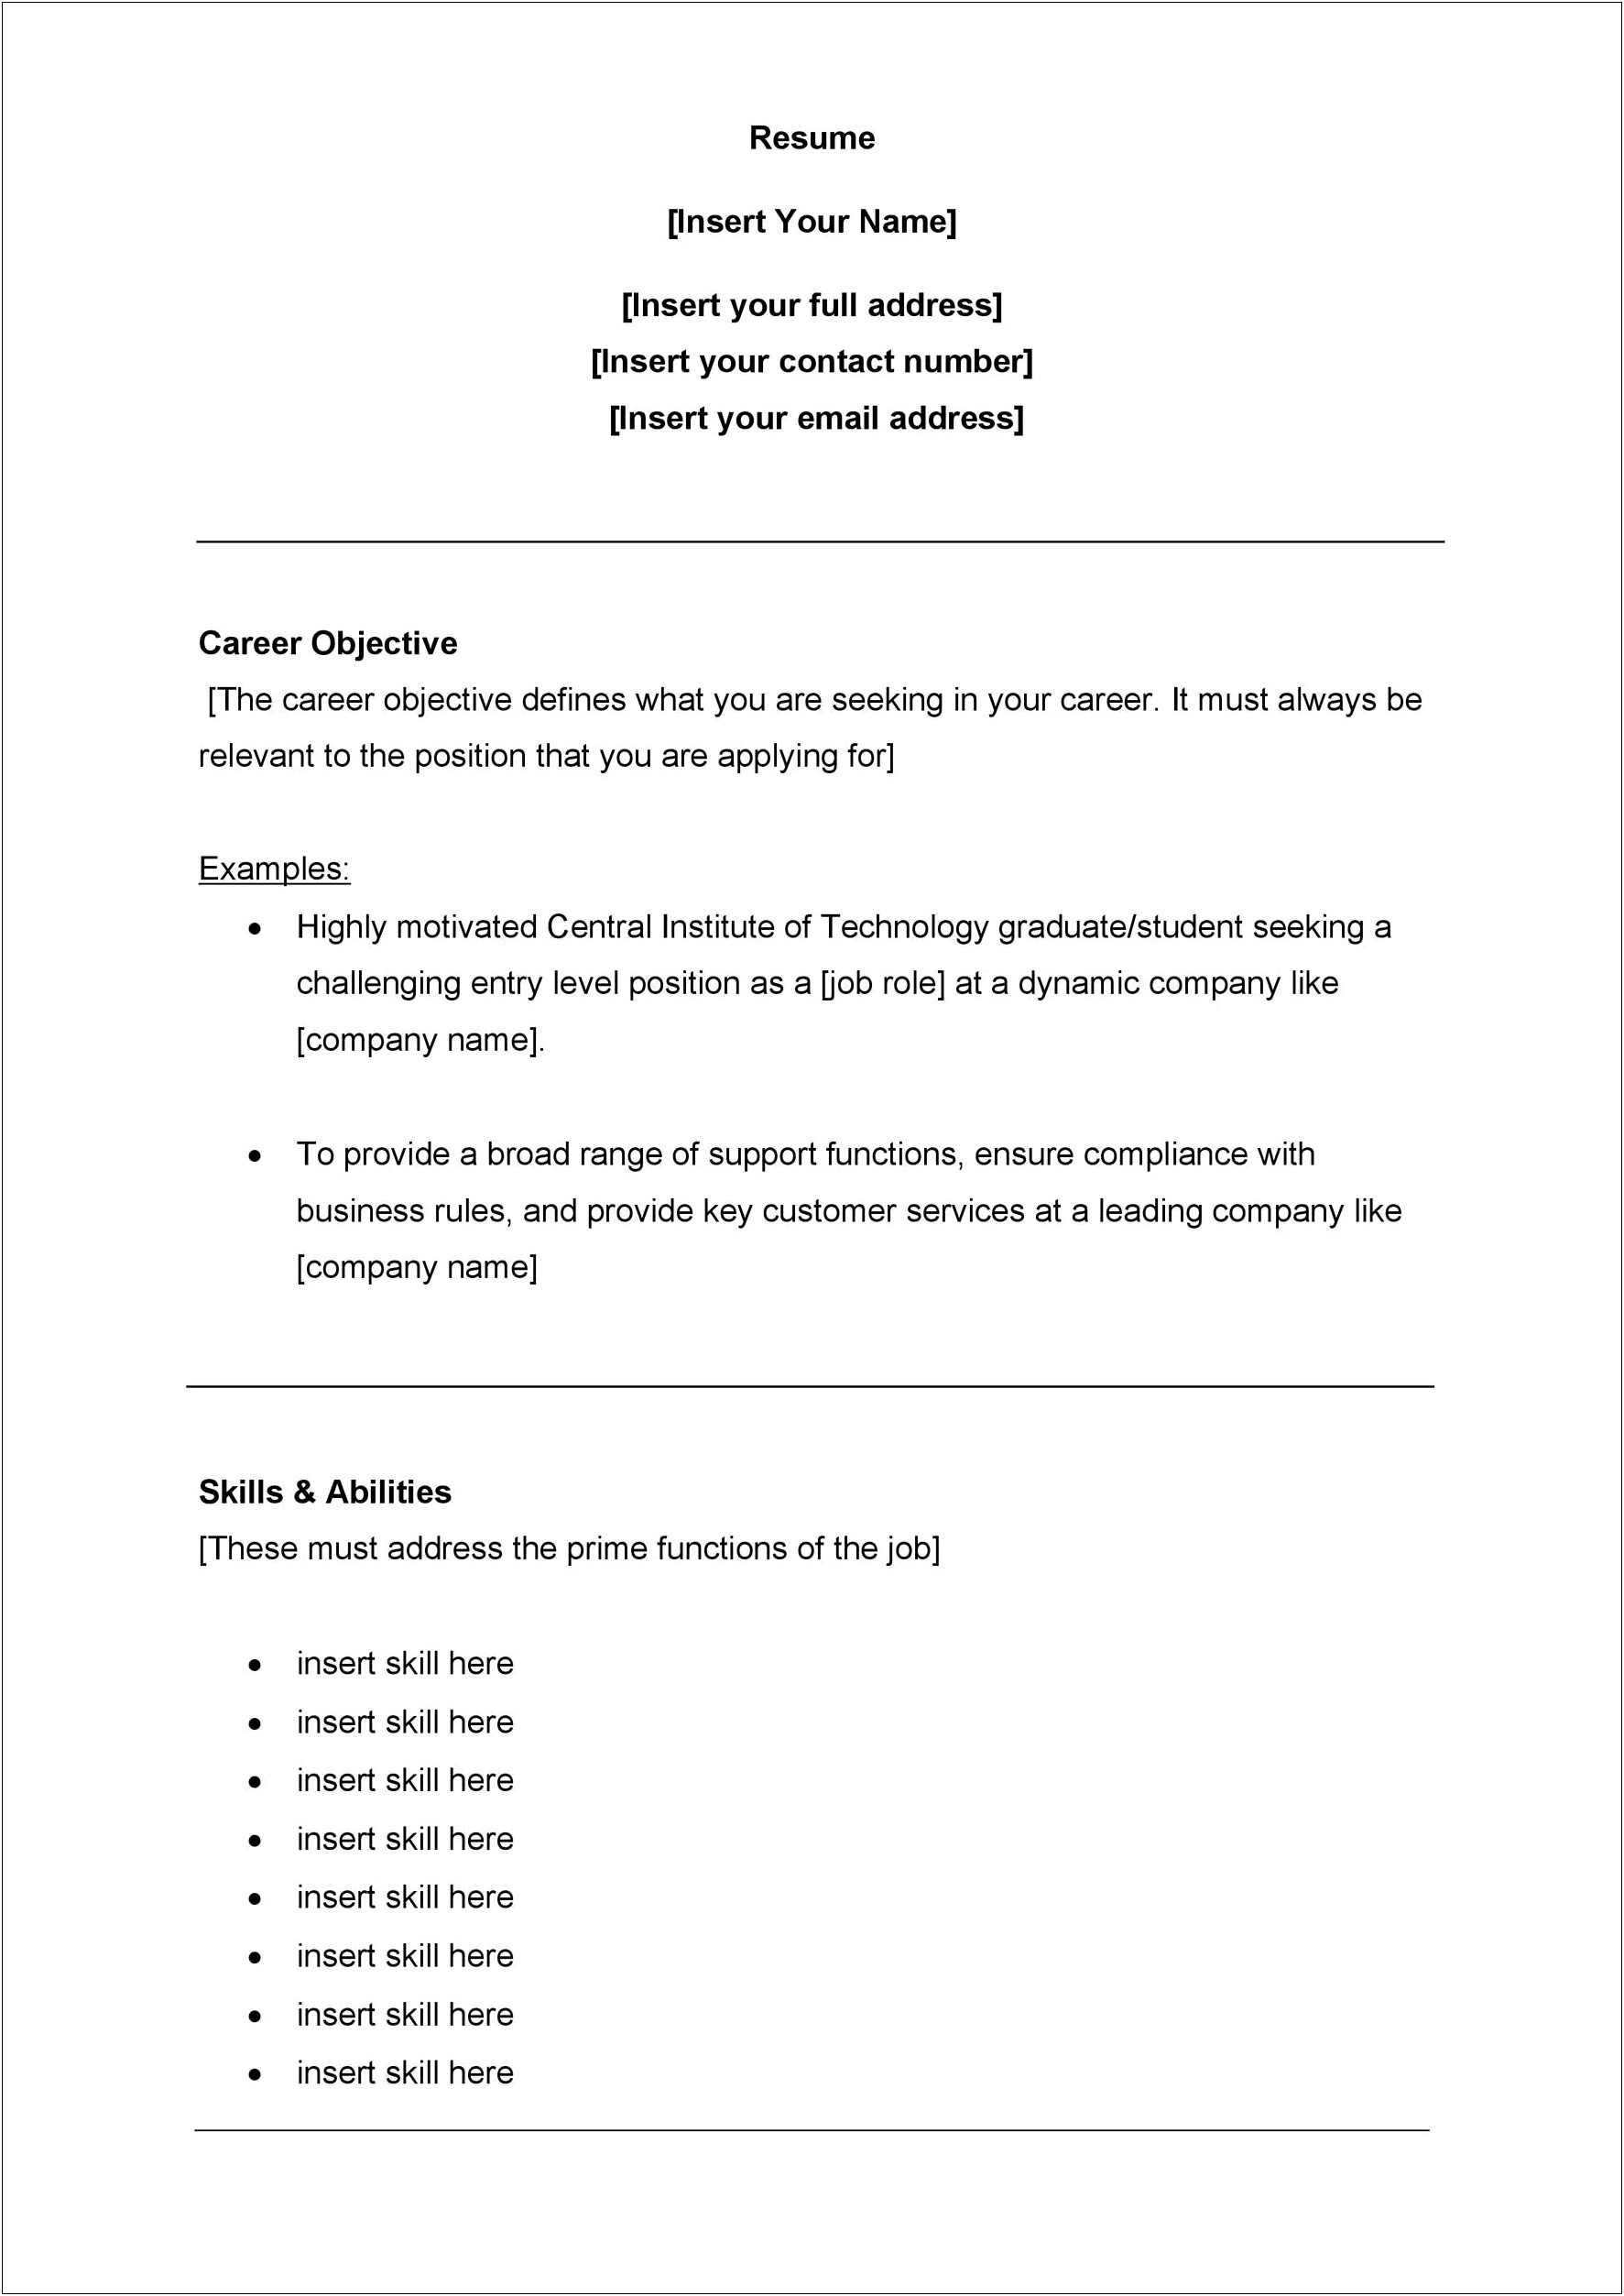 Sample Resume Qualifications For Customer Service